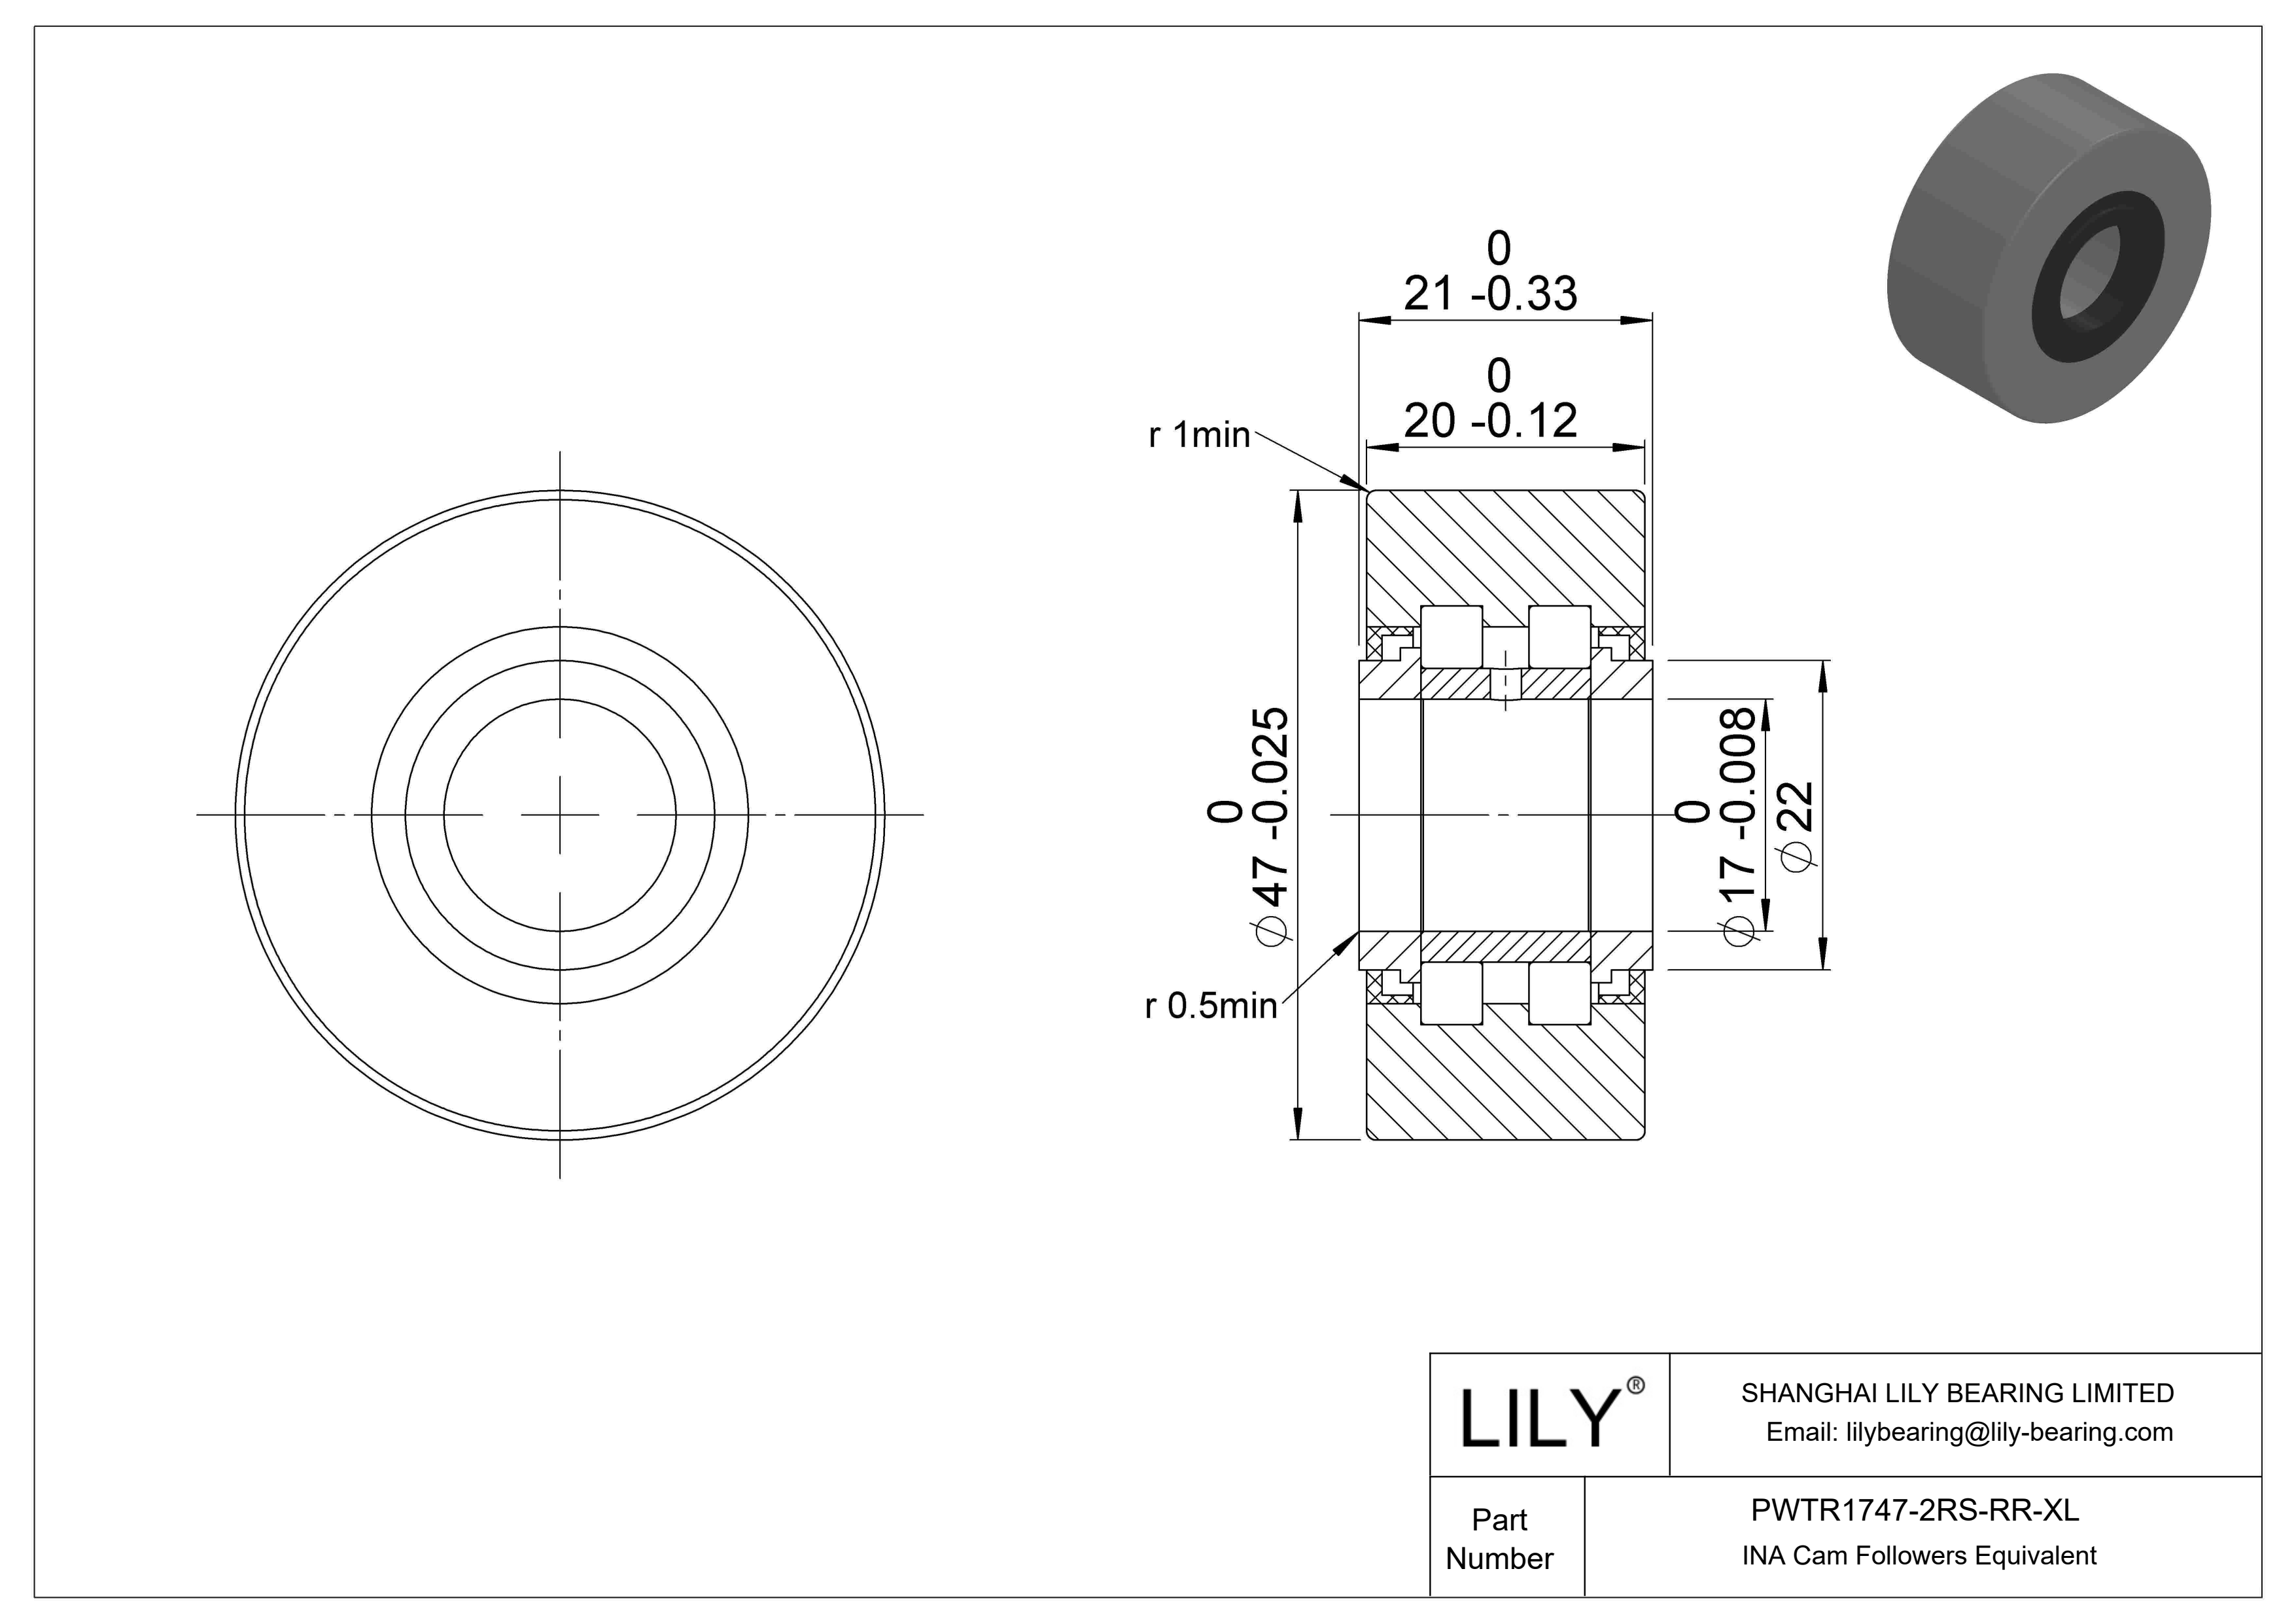 PWTR1747-2RS-RR-XL Yoke Type Track Rollers cad drawing